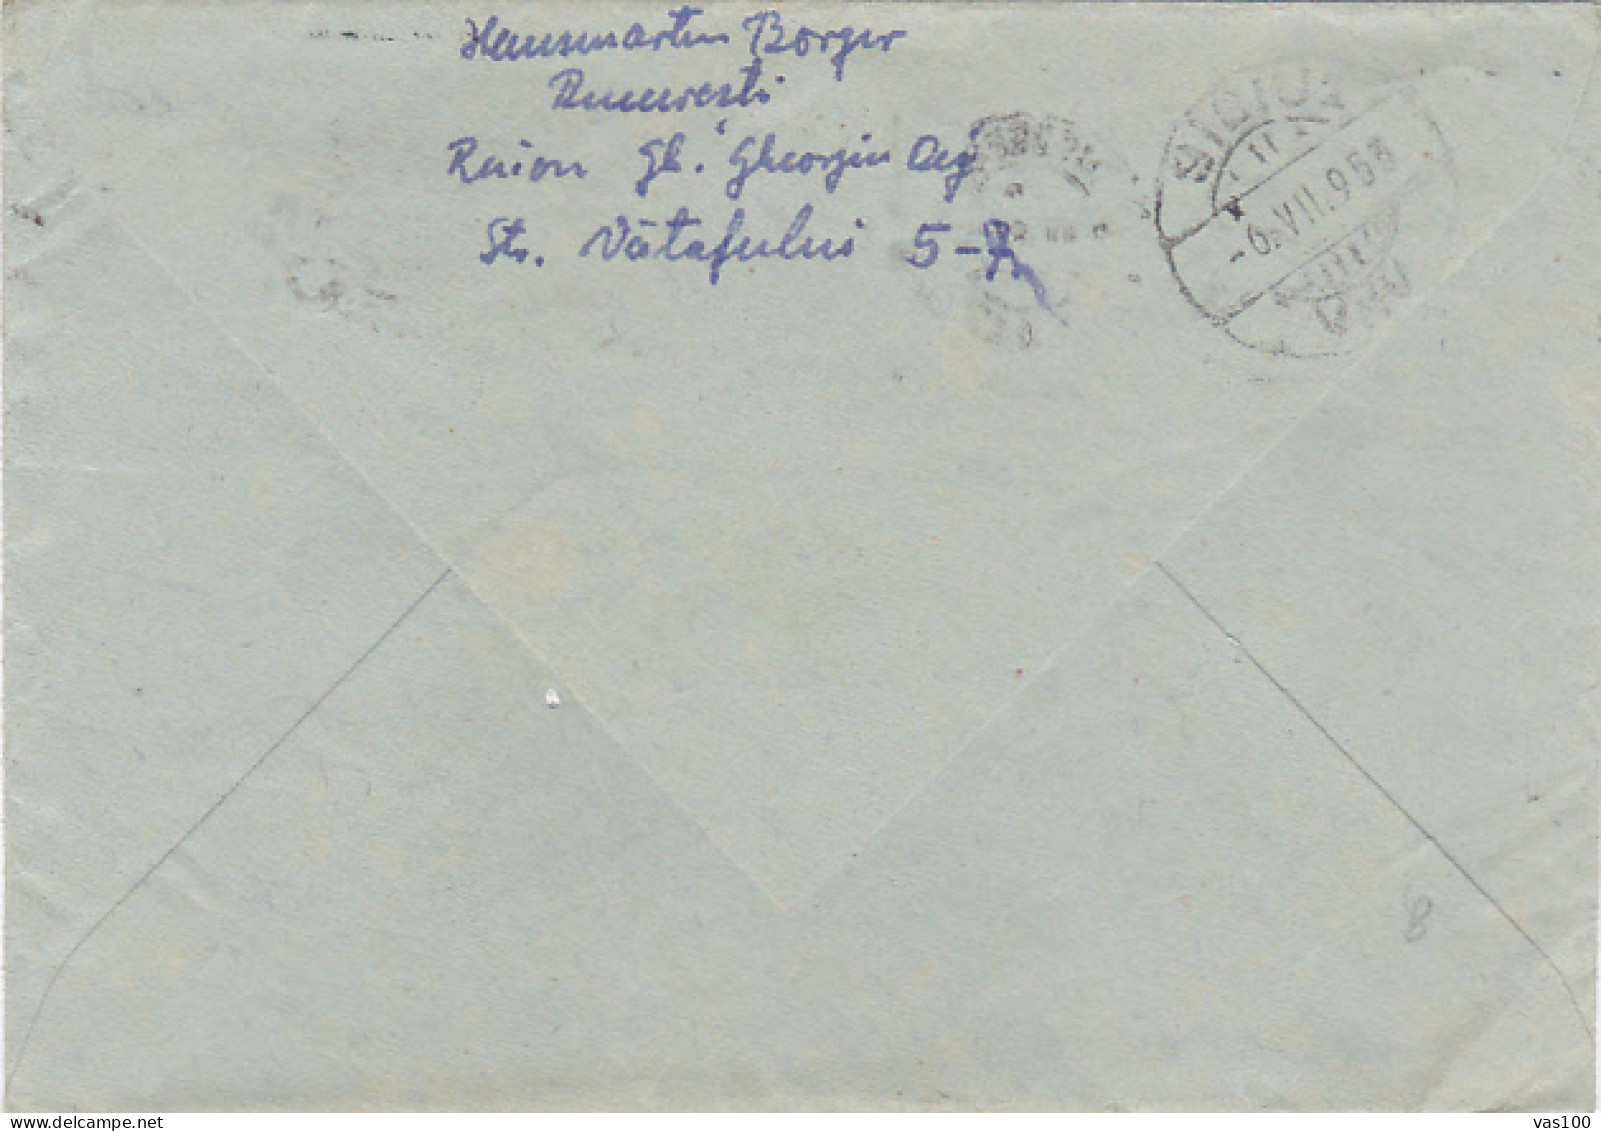 AGRICULTURE, STAMPS ON COVER, 1953, ROMANIA - Covers & Documents